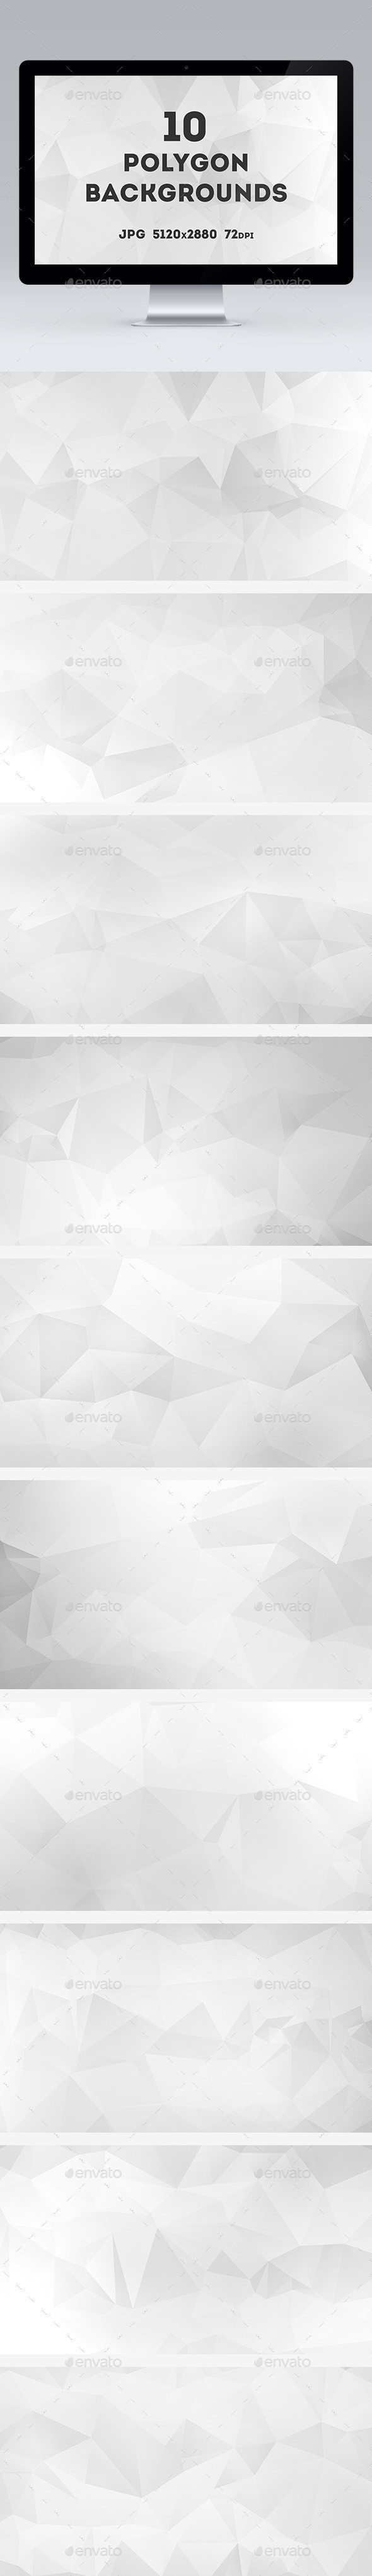 10 20white 20polygon 20backgrounds 20preview